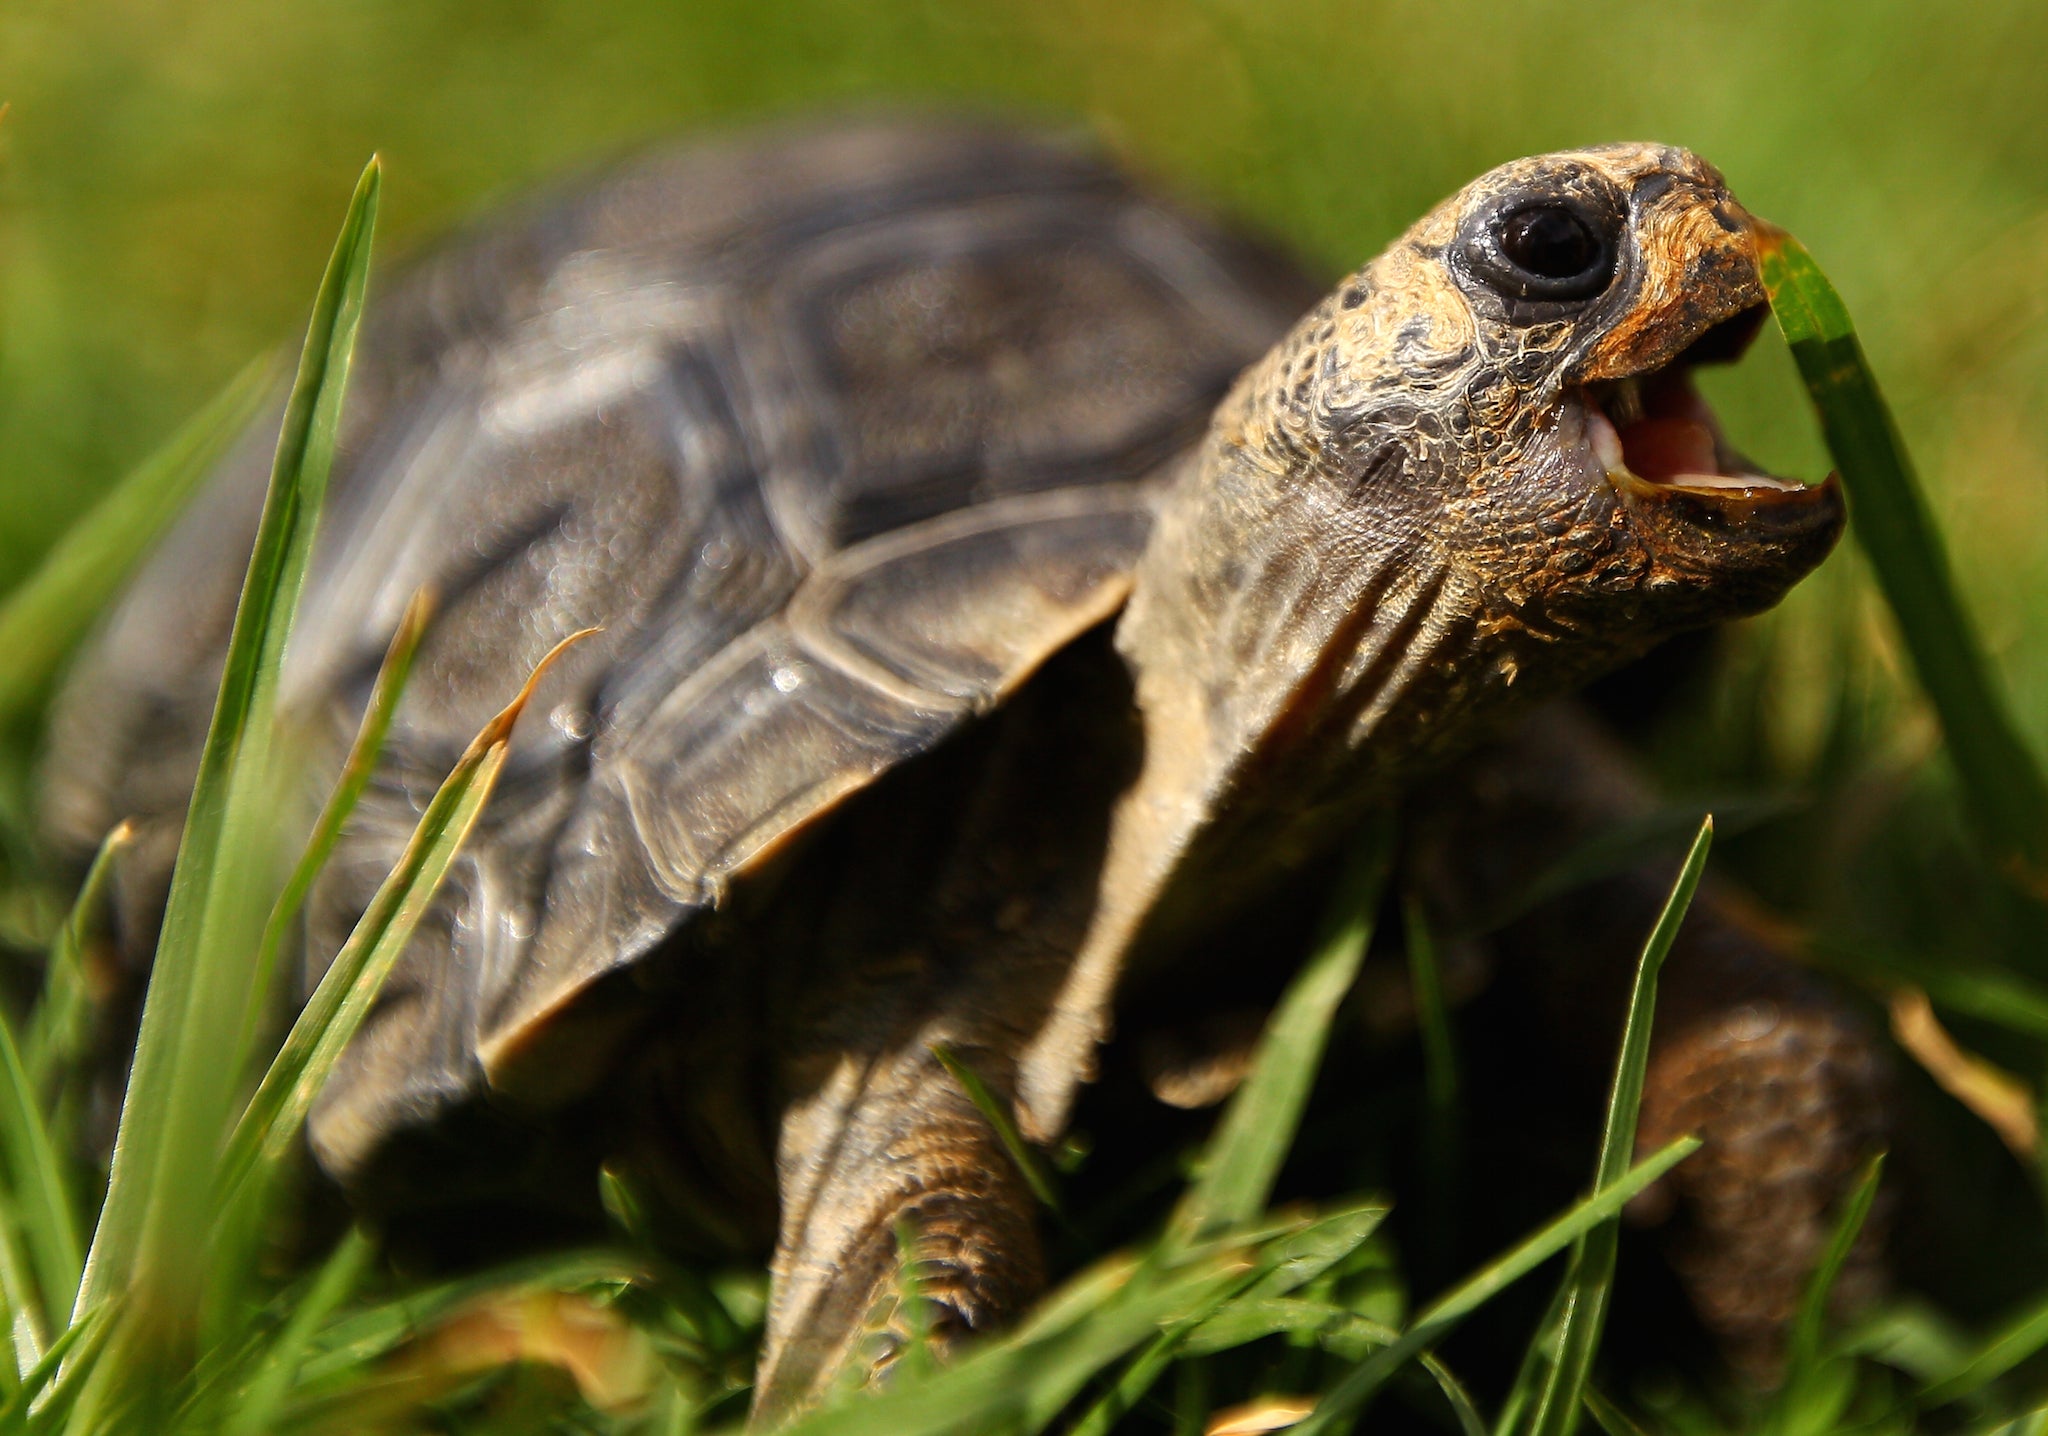 A one year old galapagos tortoise eats grass in Australia.